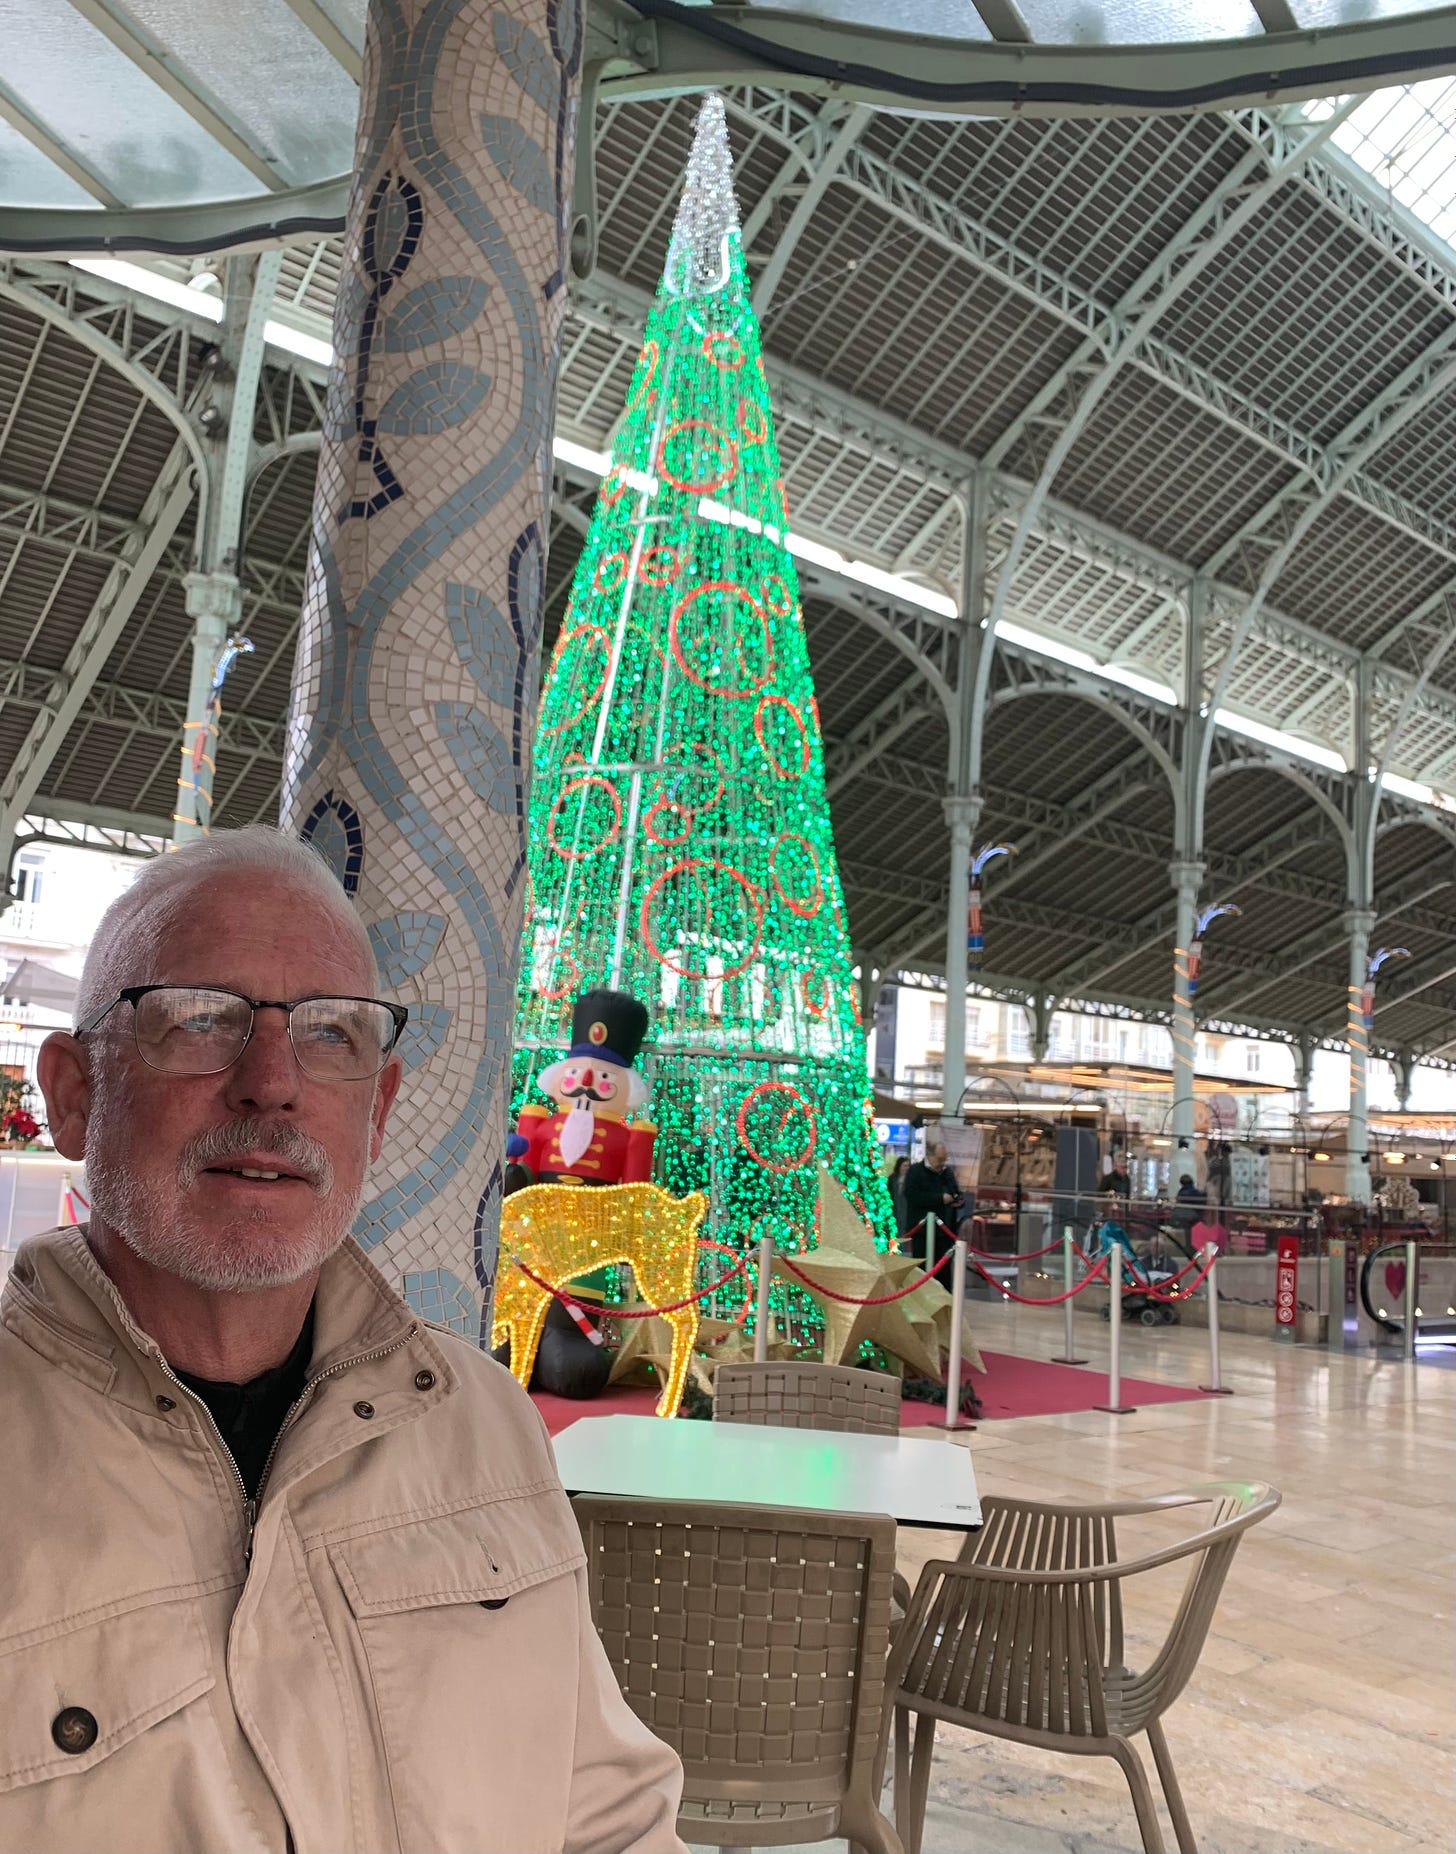 The main level of Colon Market has nutcrackers and lights on each column and a big Christmas tree made of lights in the center.